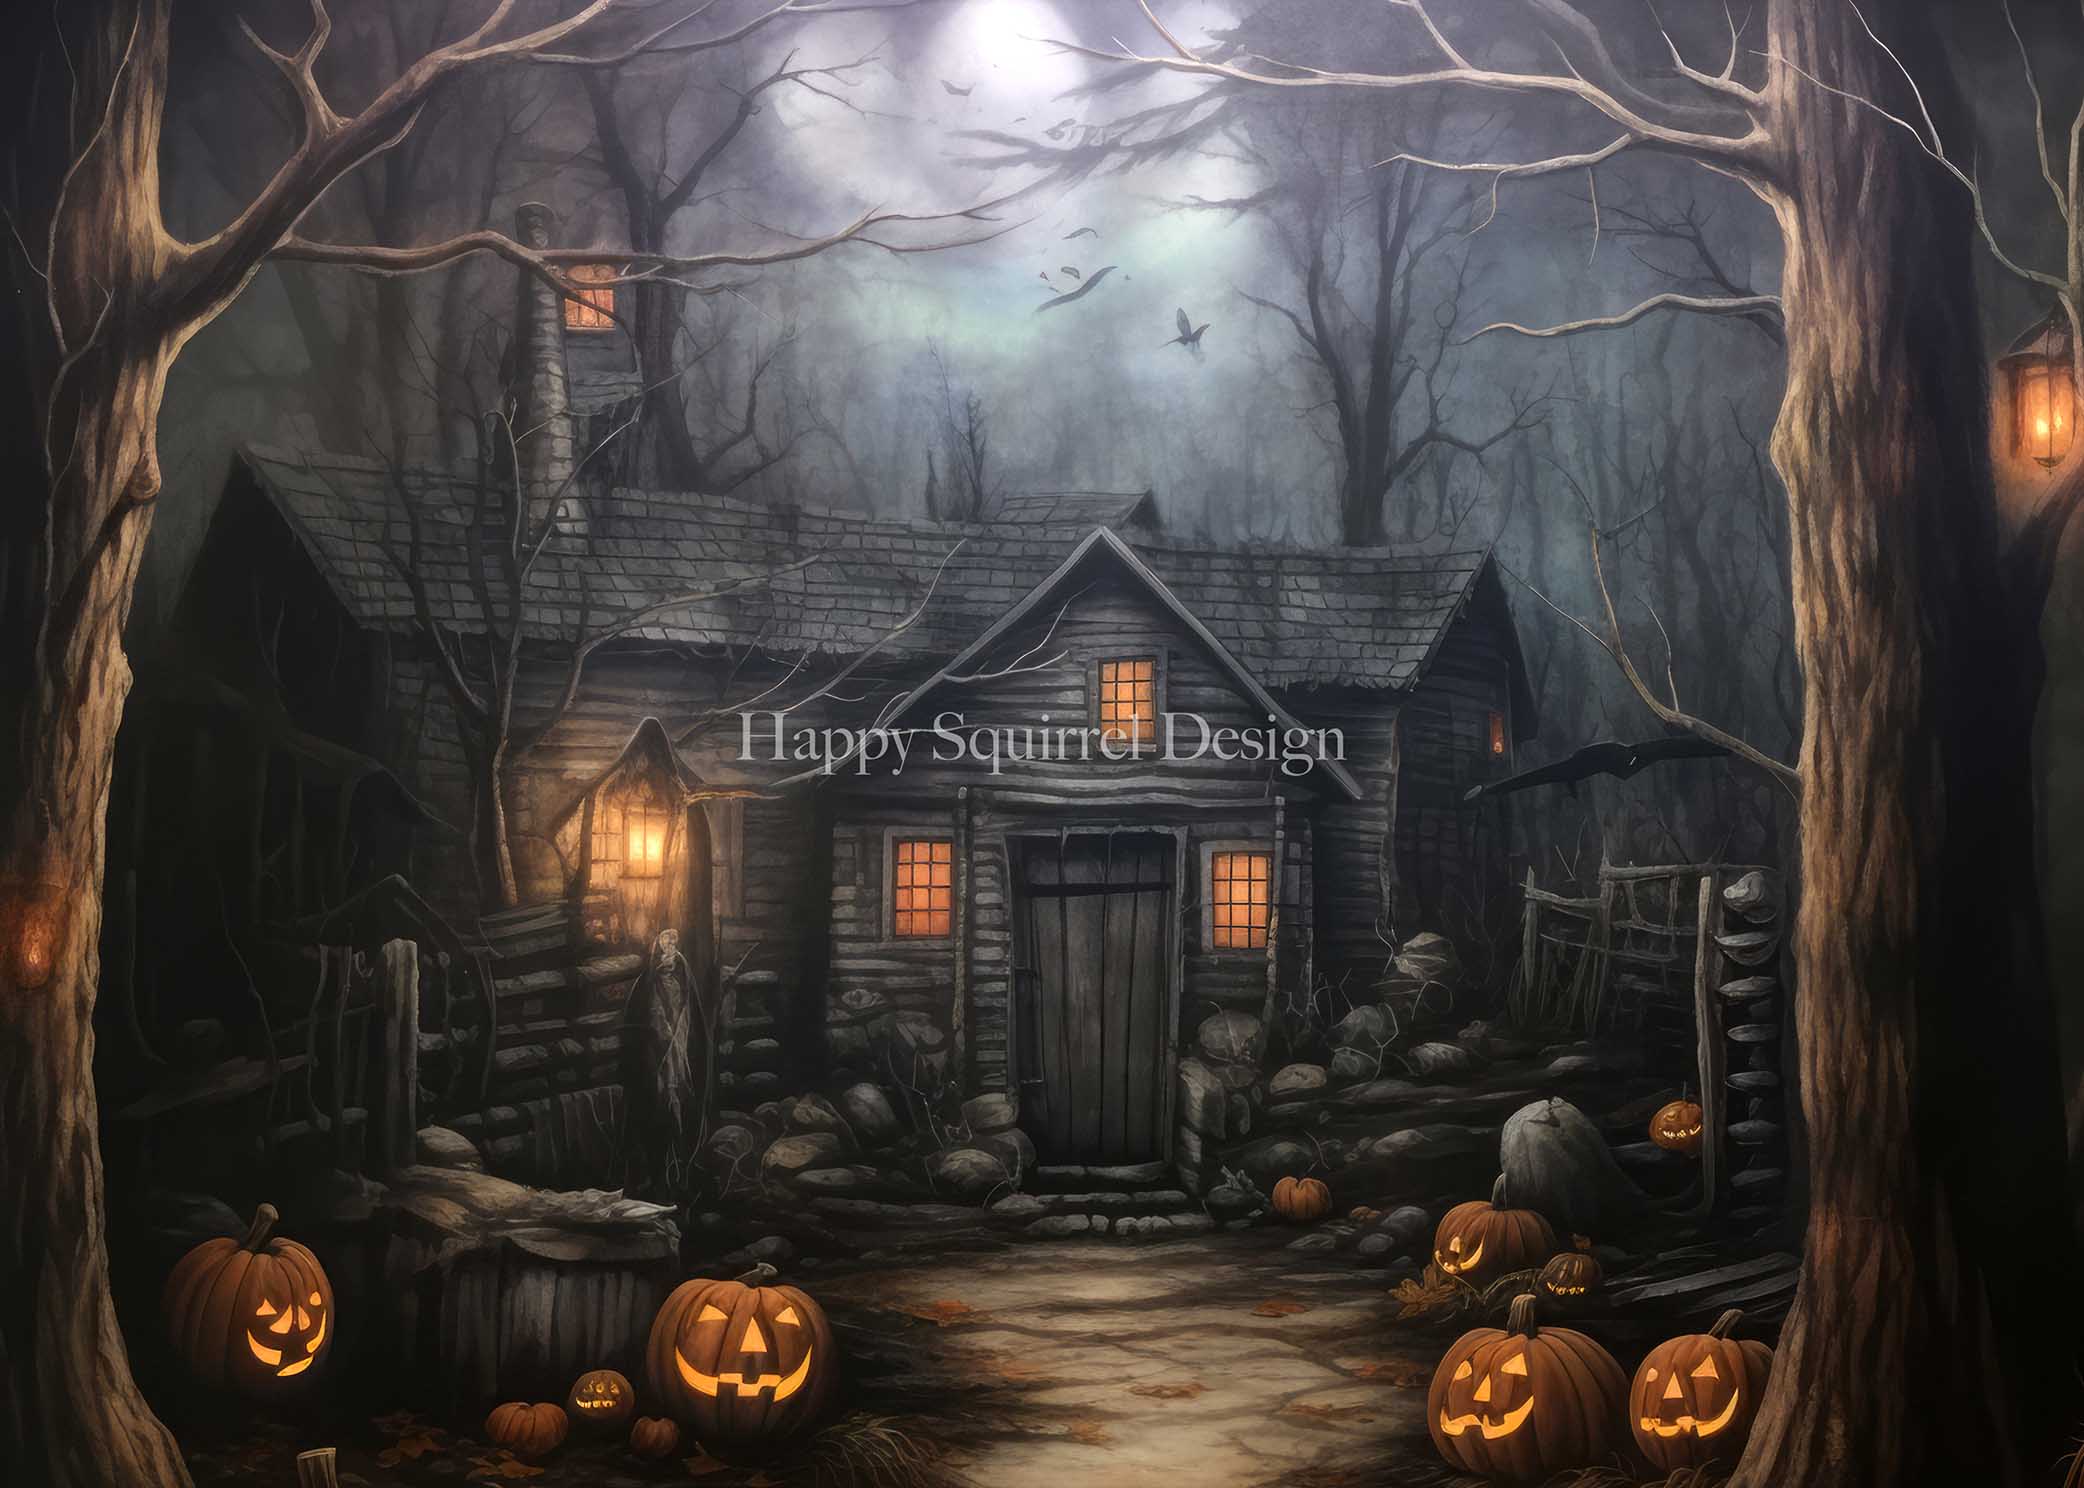 Kate Halloween House in the Woods Backdrop Designed by Happy Squirrel Design